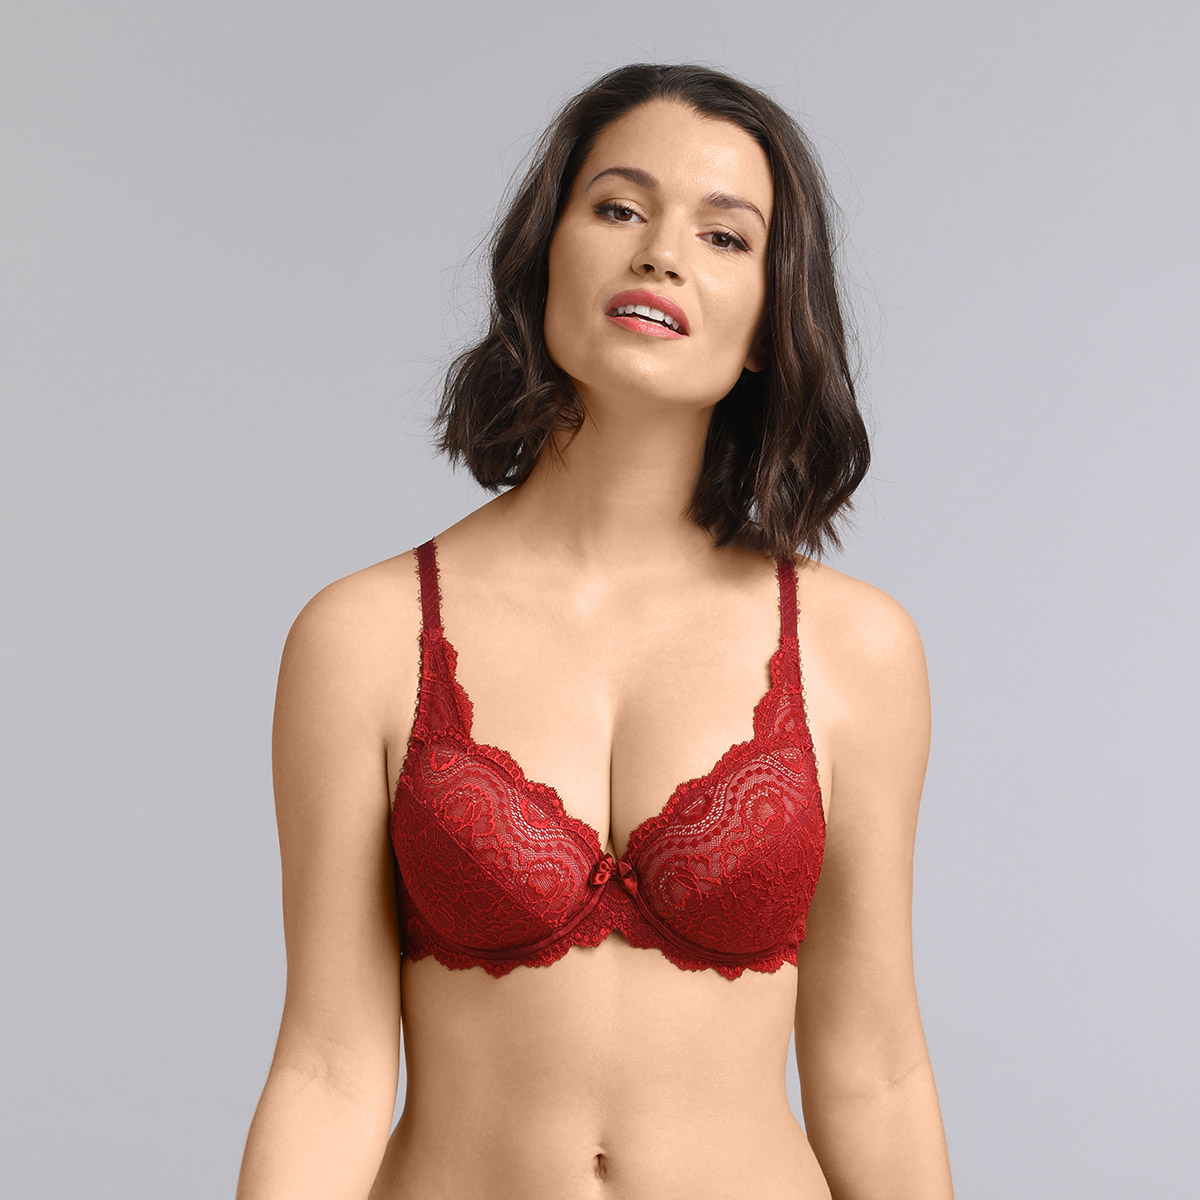 Vibrant Red B-G Playtex Flower Lace Wired Bra Style 5832. Sizes 34-42 